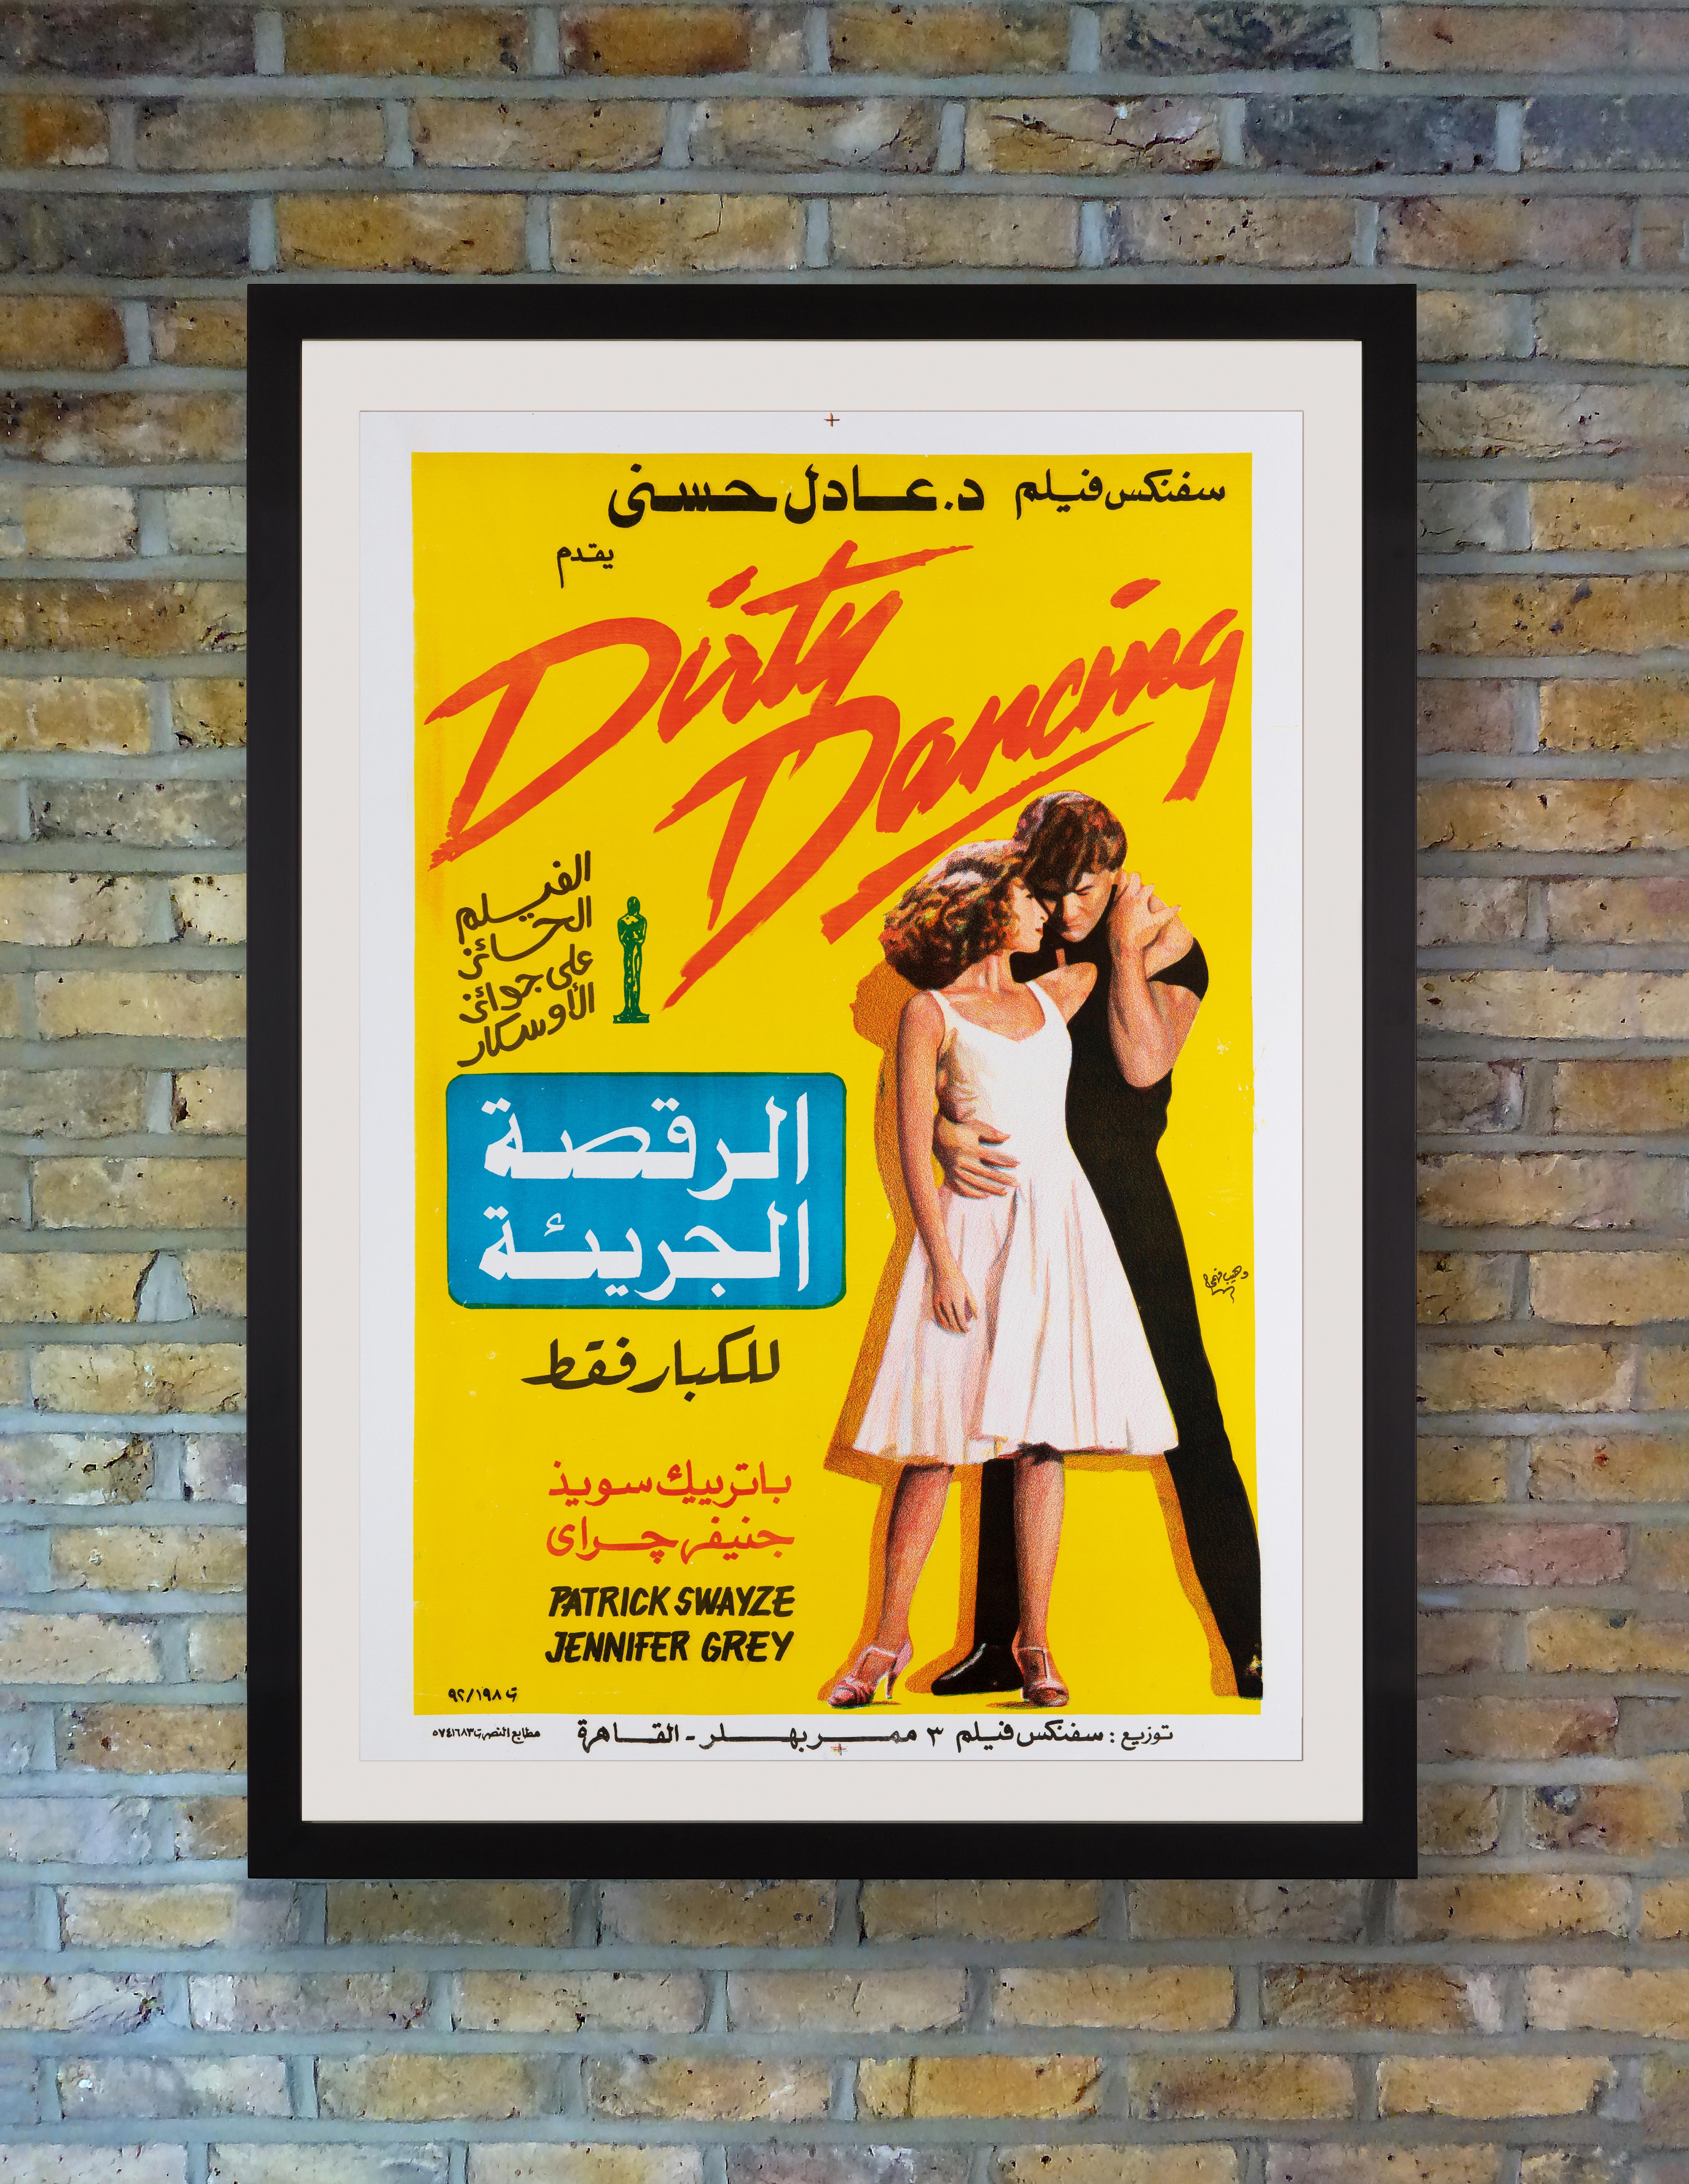 Printed in sumptuous stone lithography, this winsome One Sheet poster by Wahib Fahmy for the first Egyptian release of 1980s coming-of-age classic 'Dirty Dancing' has us swooning. Sweet and unashamedly schmaltzy, yet peppered with subtle social